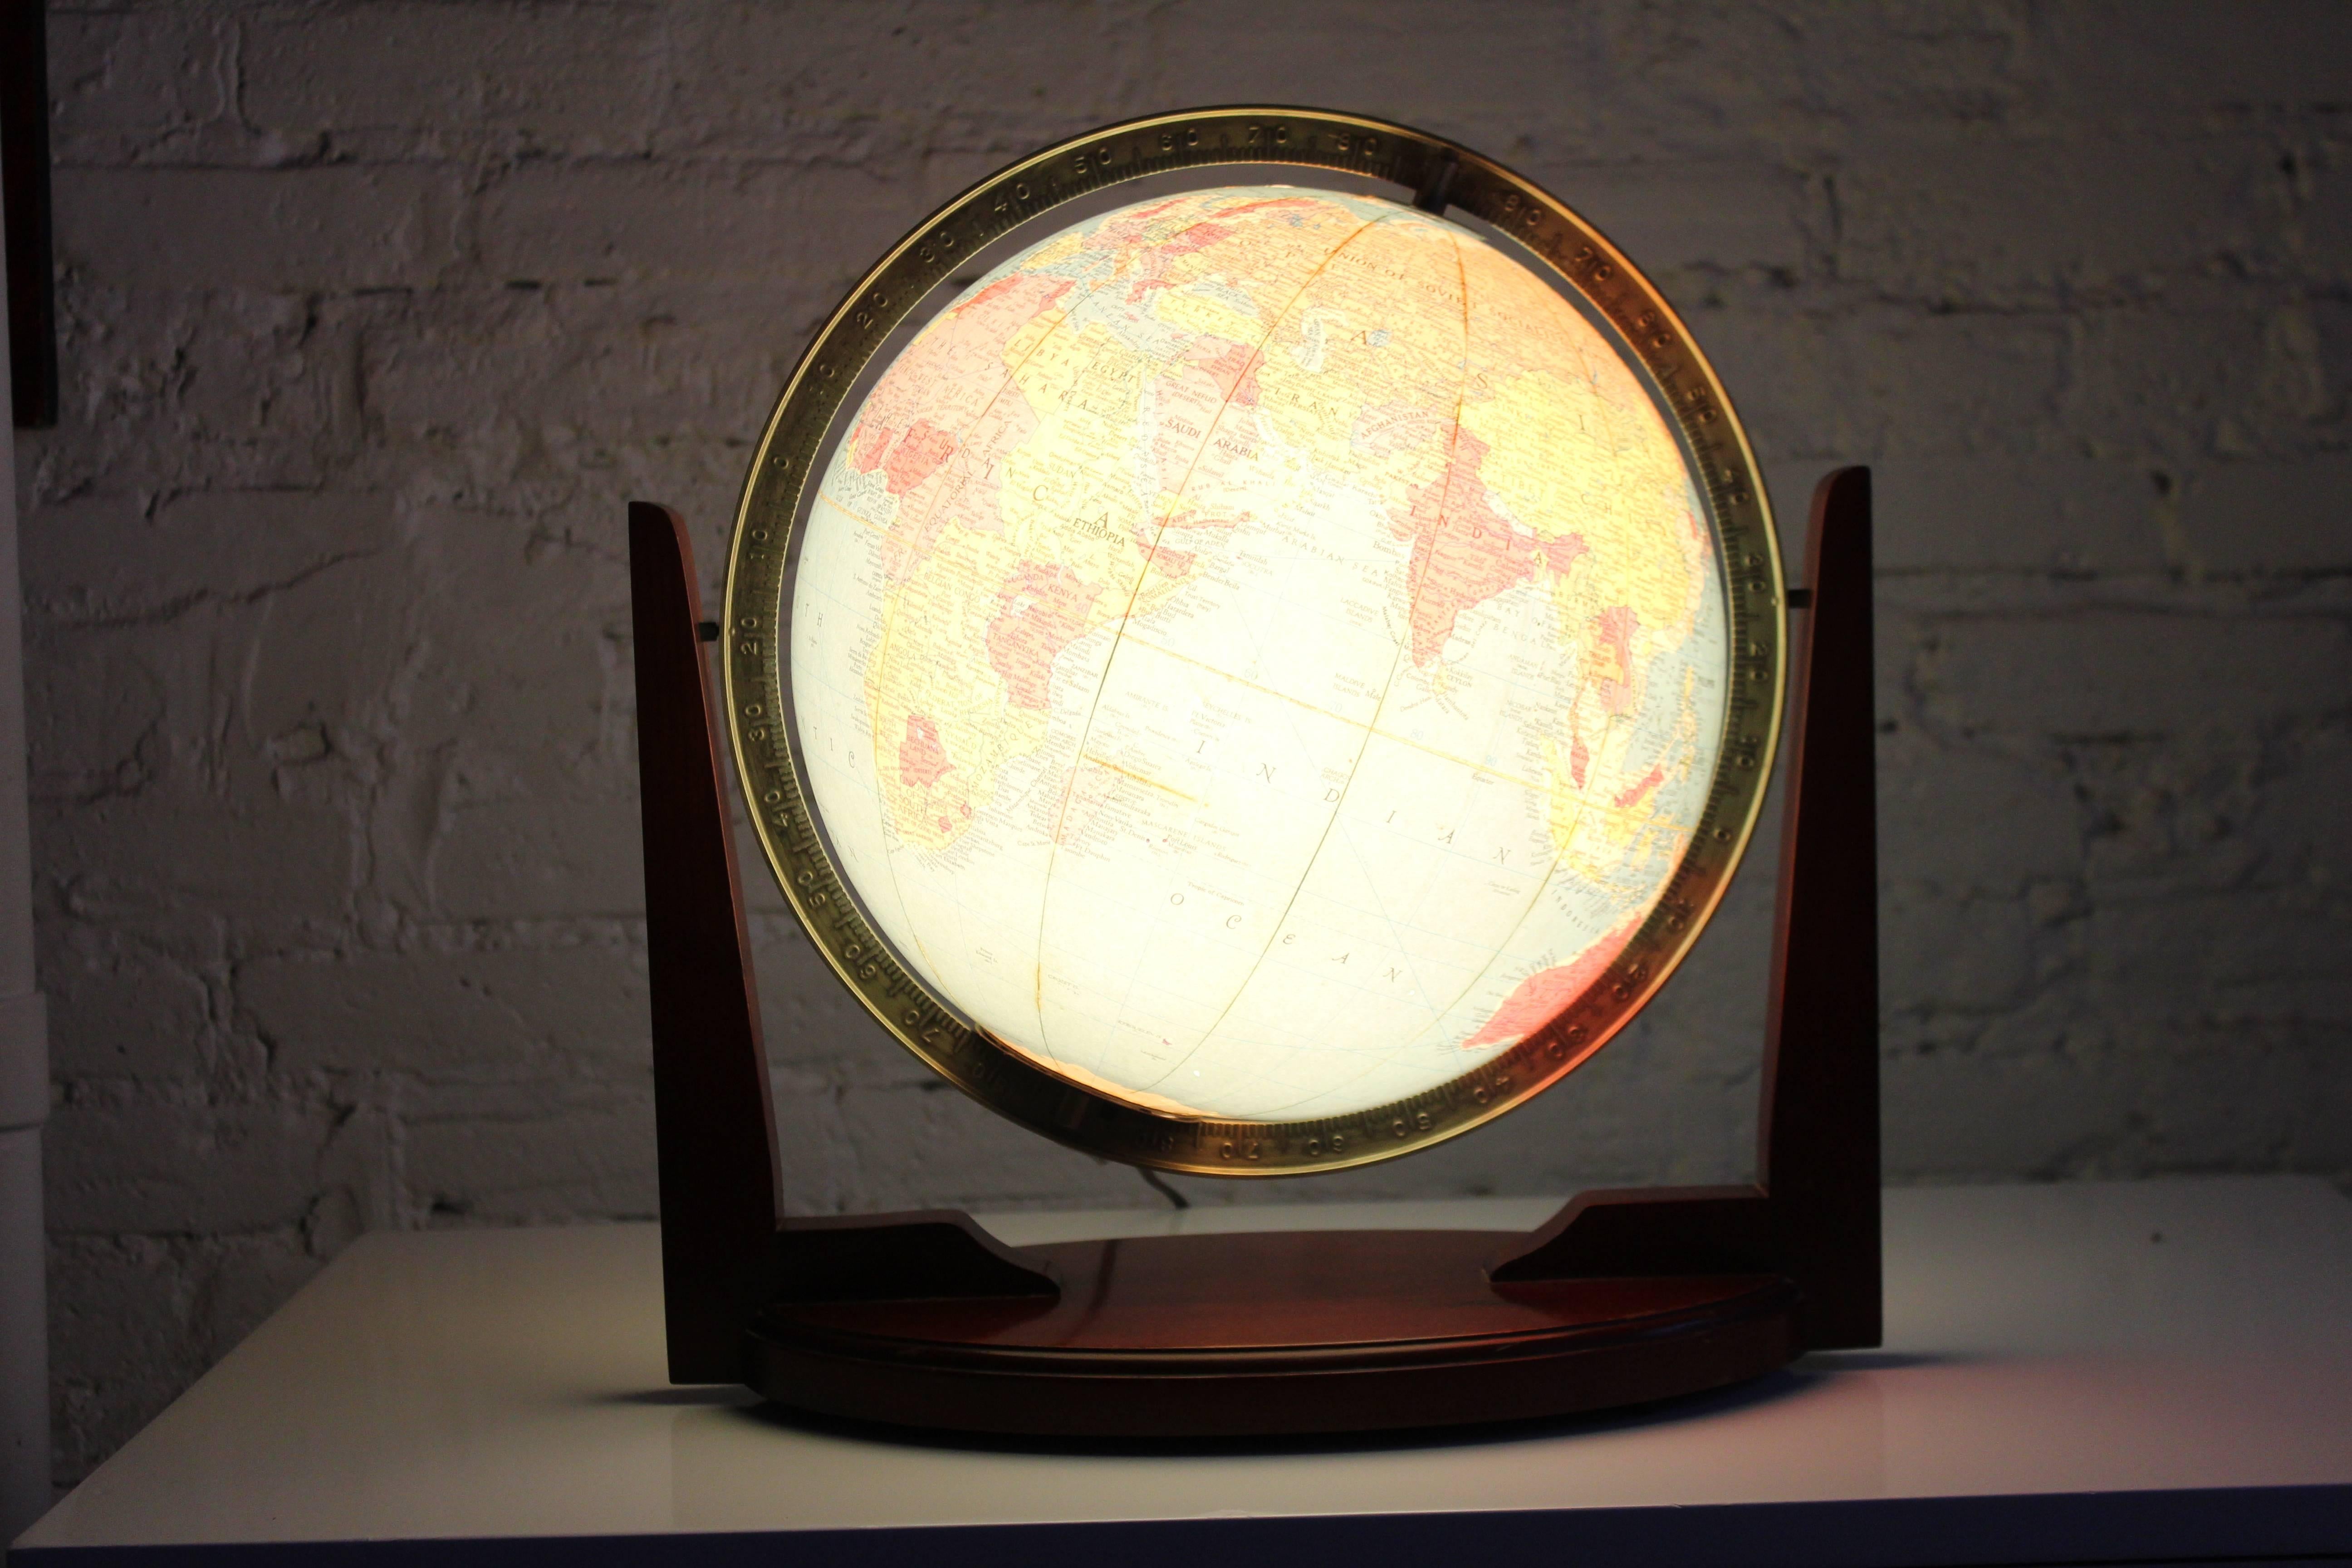 Designed and edited by Cartographer Gustav Brueckmann, this internally lit glass orb illuminated globe by Replogle does double duty as a serious collectors piece and desk or table lamp. Can you spot the countries that once were? Questions regarding